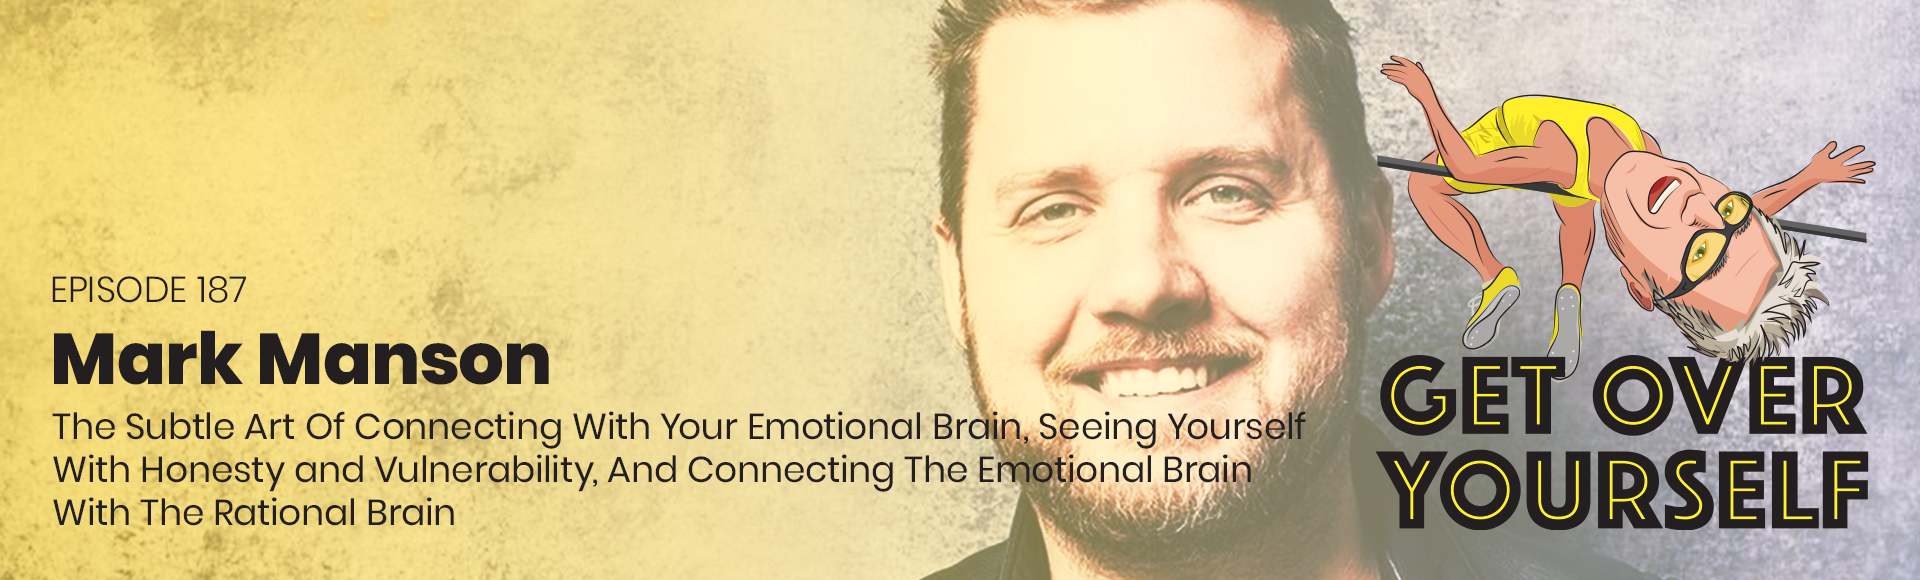 37 Powerful Mark Manson Quotes to Get Your Life in Order (Explained)